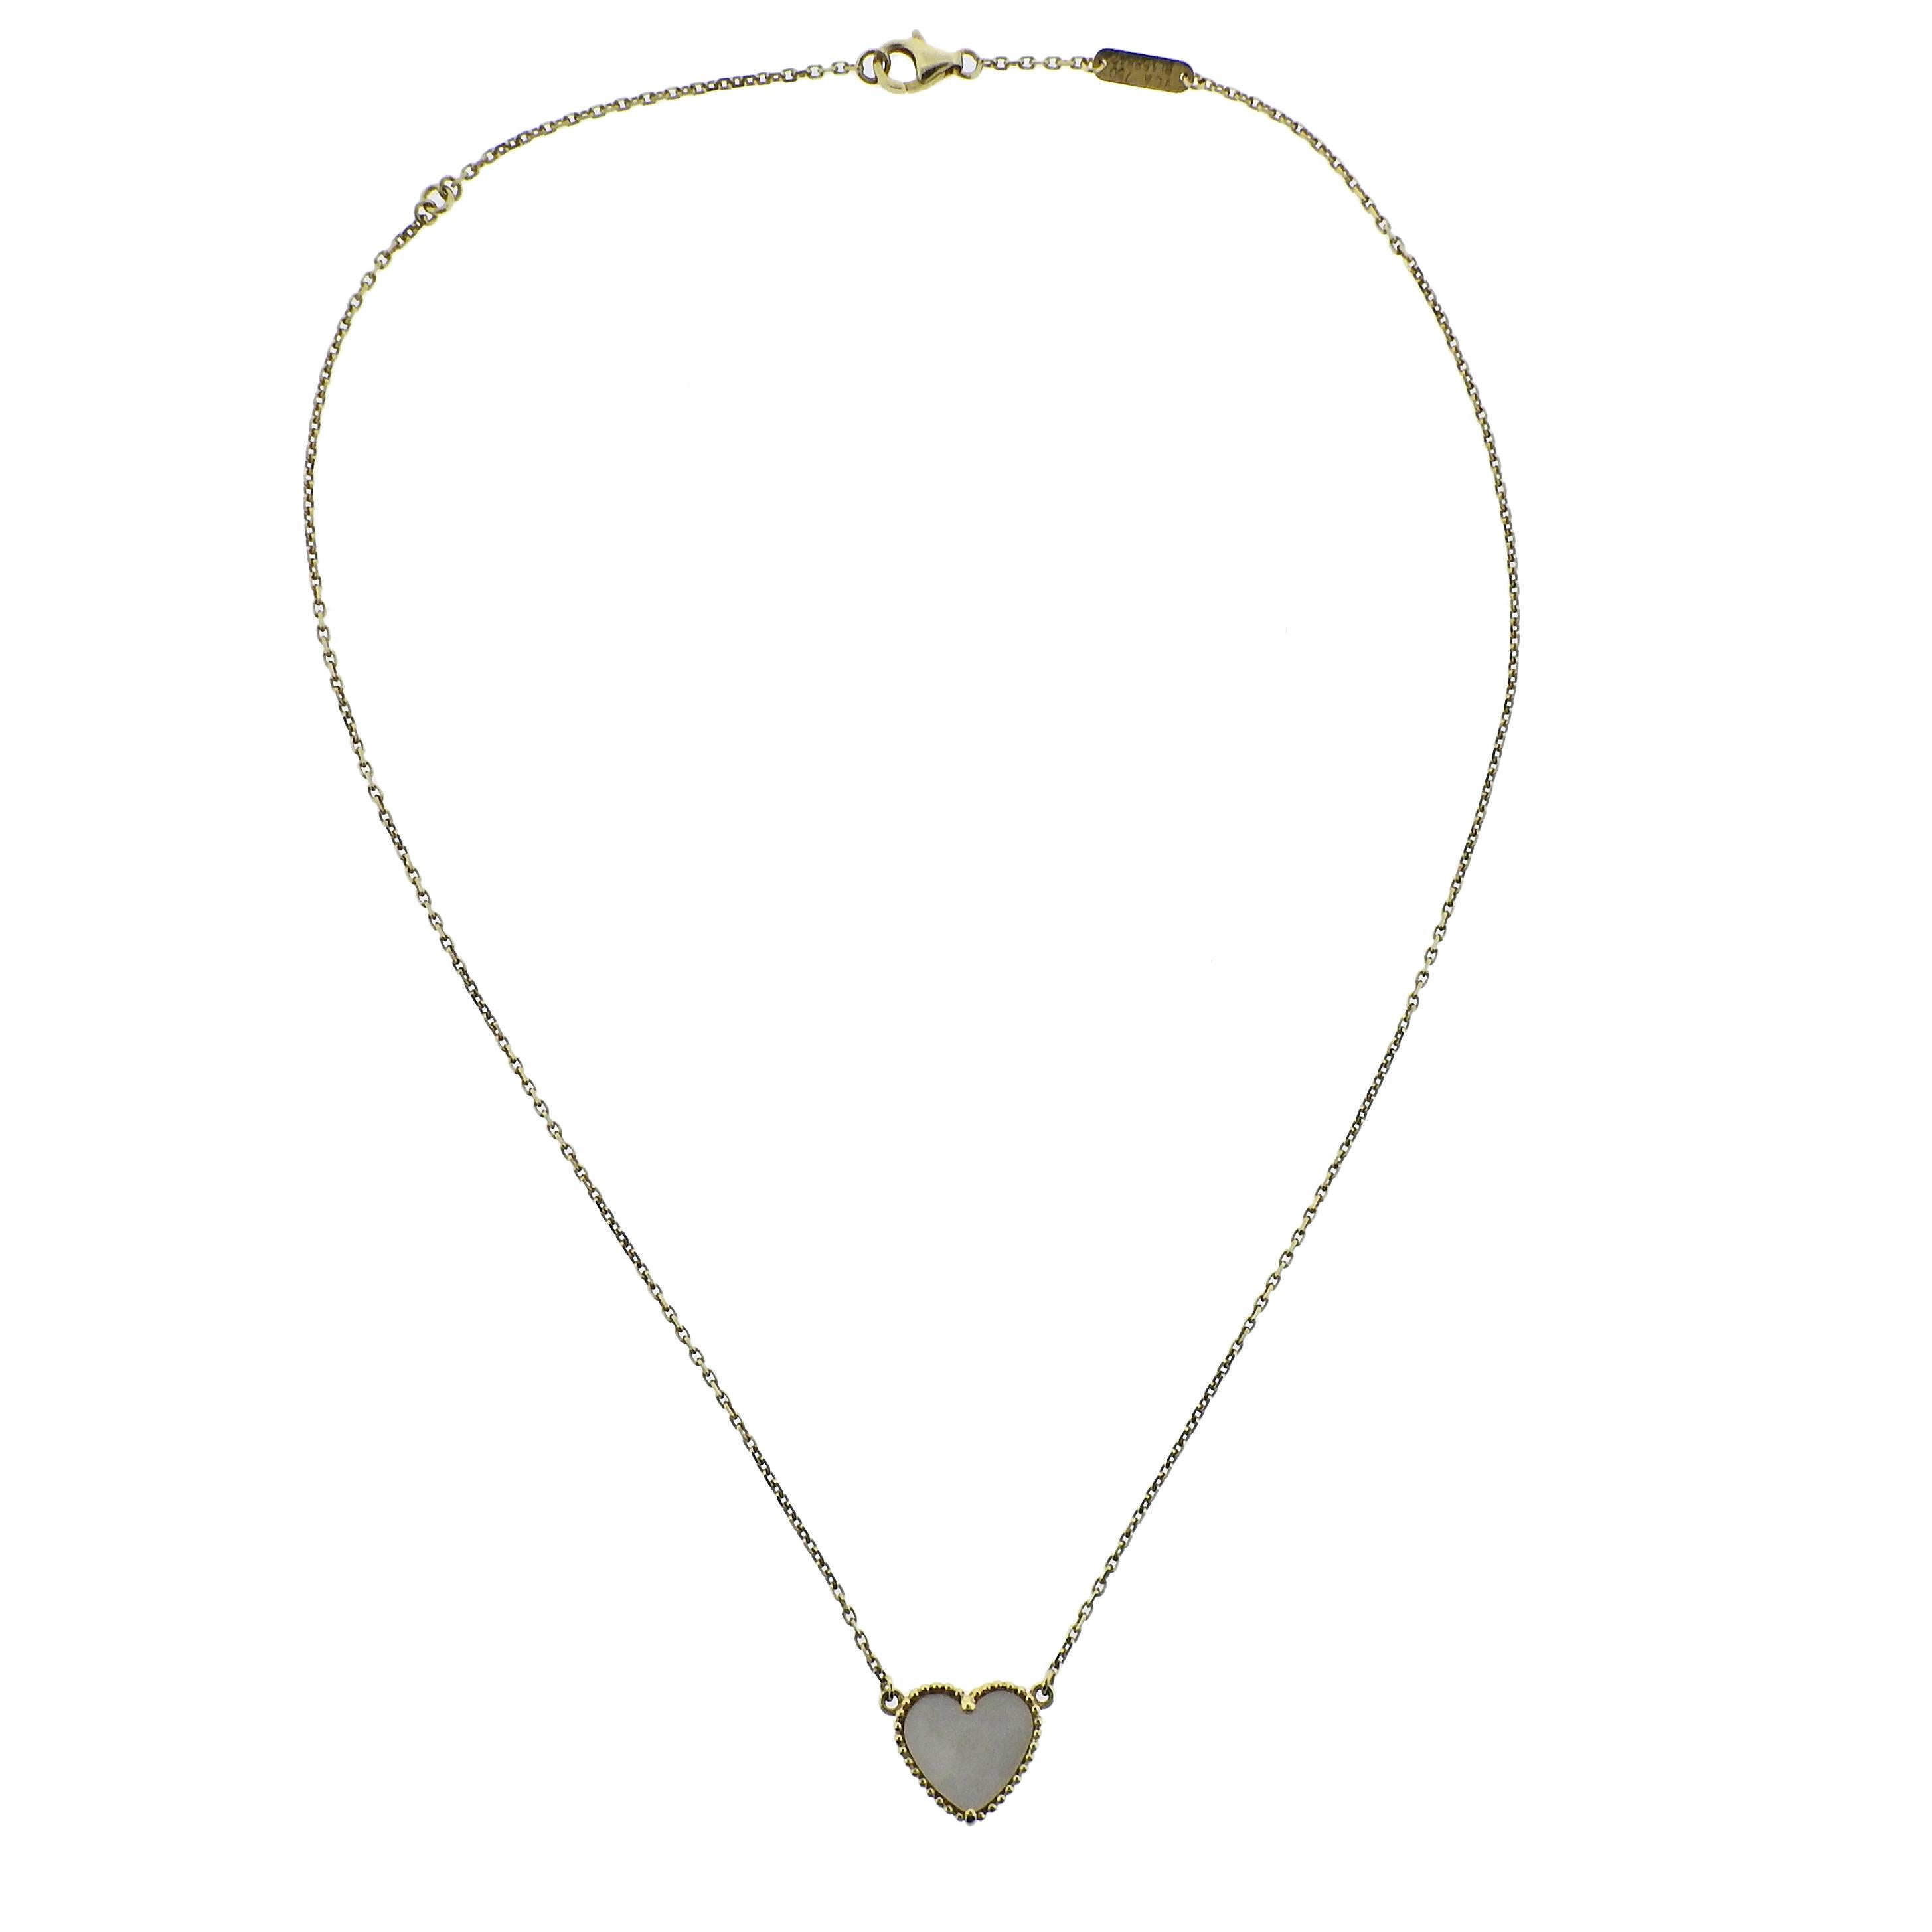 18k gold necklace by Van Cleef & Arpels, crafted for Lucky Alhambra collection, featuring heart pendant, set with mother of pearl.  Necklace is 17